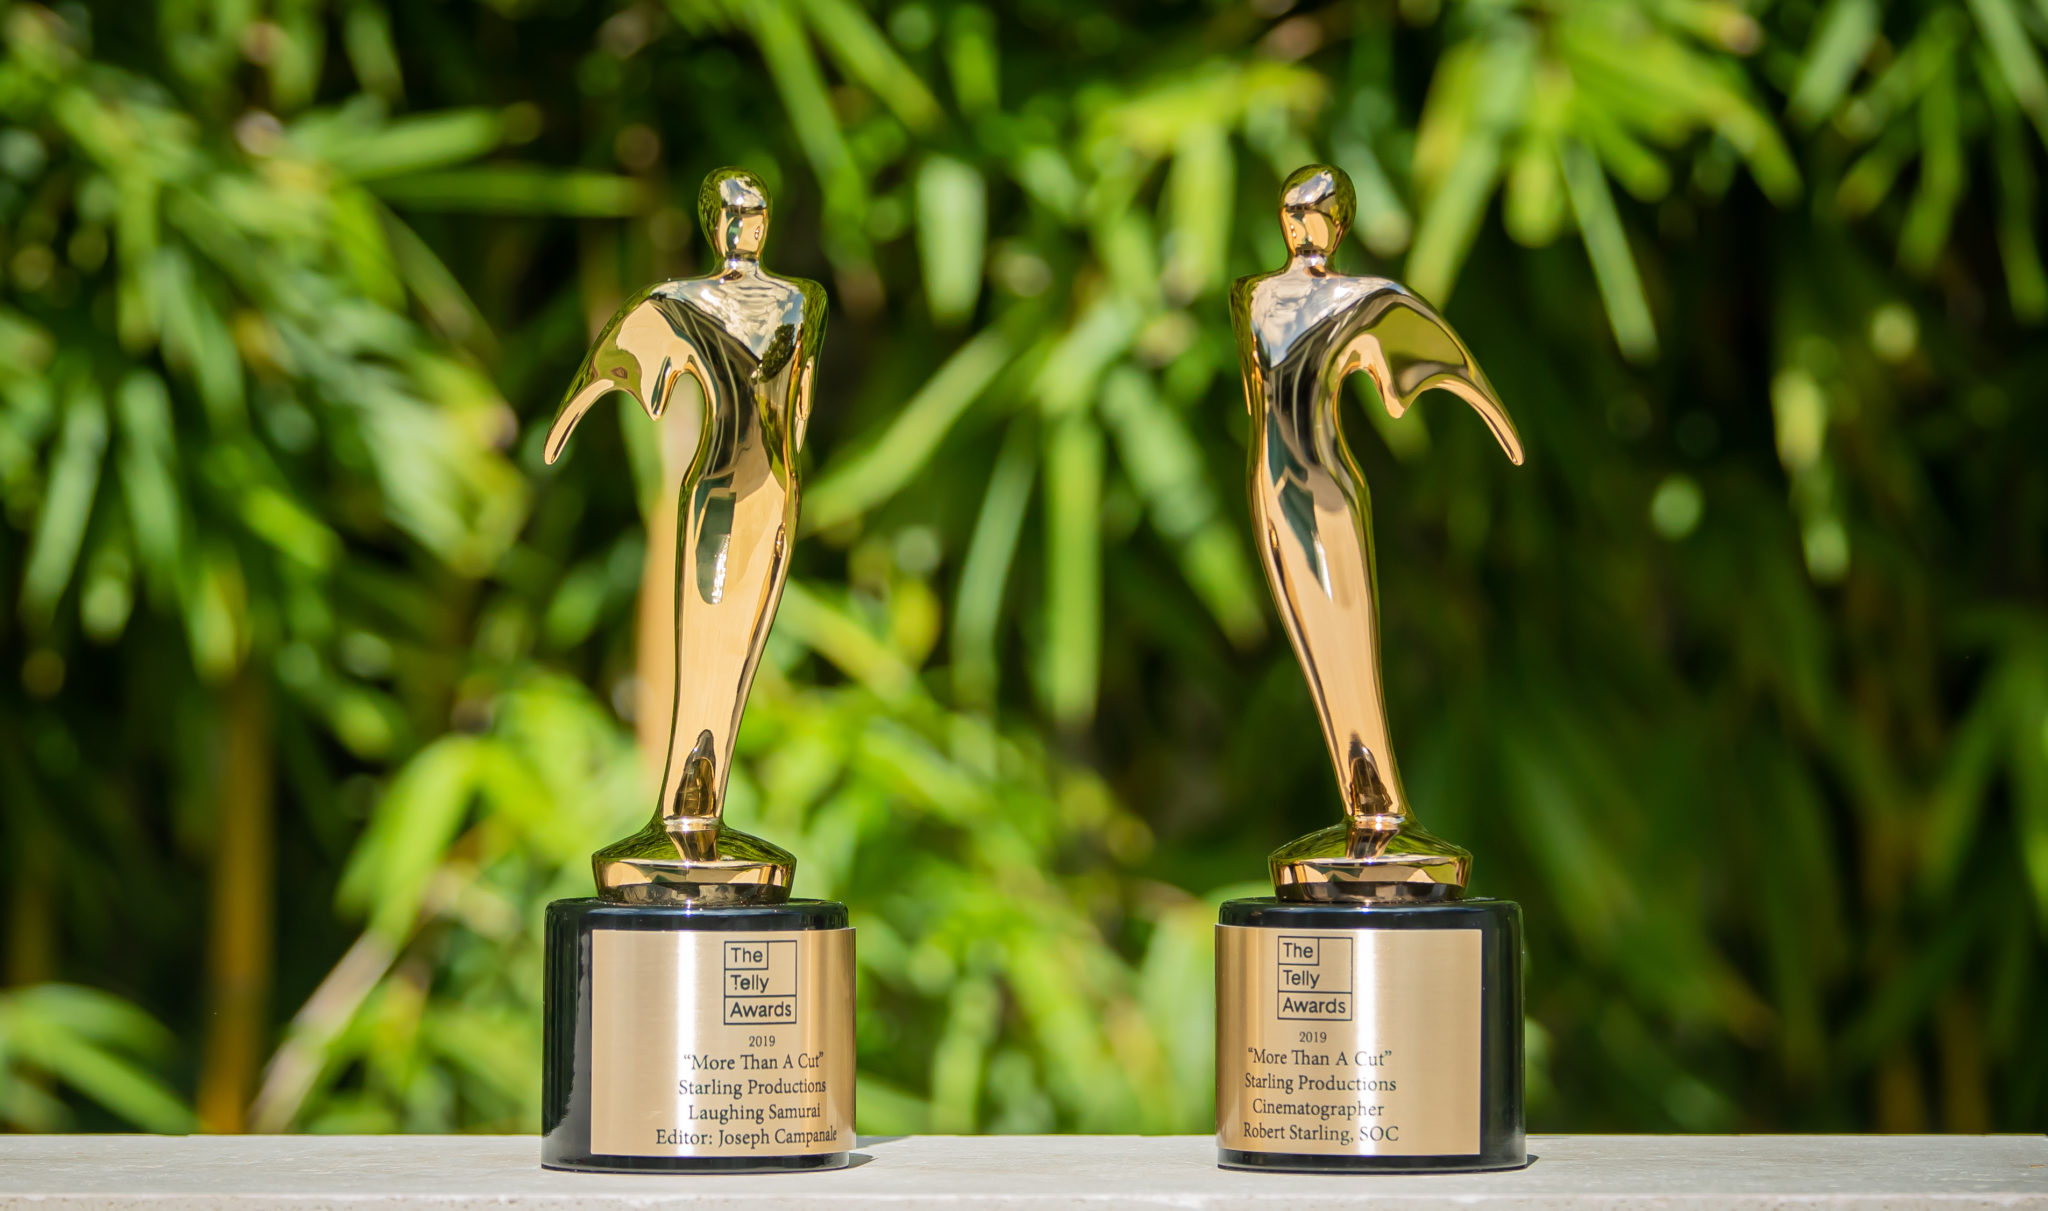 Telly Award Winning Project Starling Productions Orlando Silver Telly